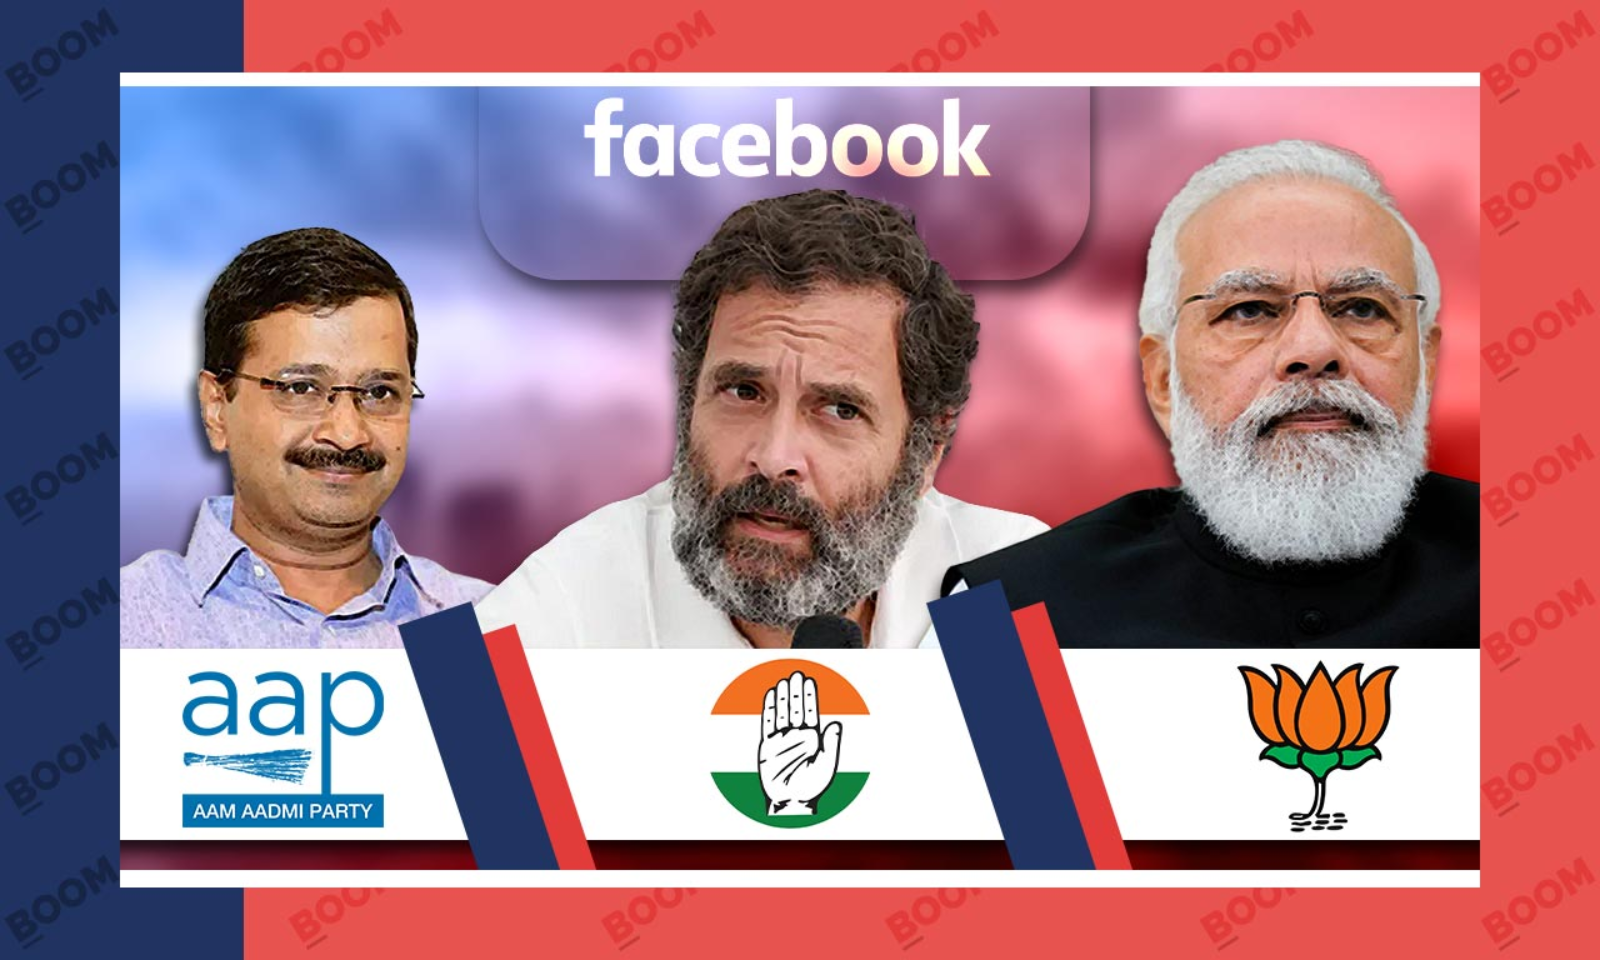 aam aadmi party facebook cover